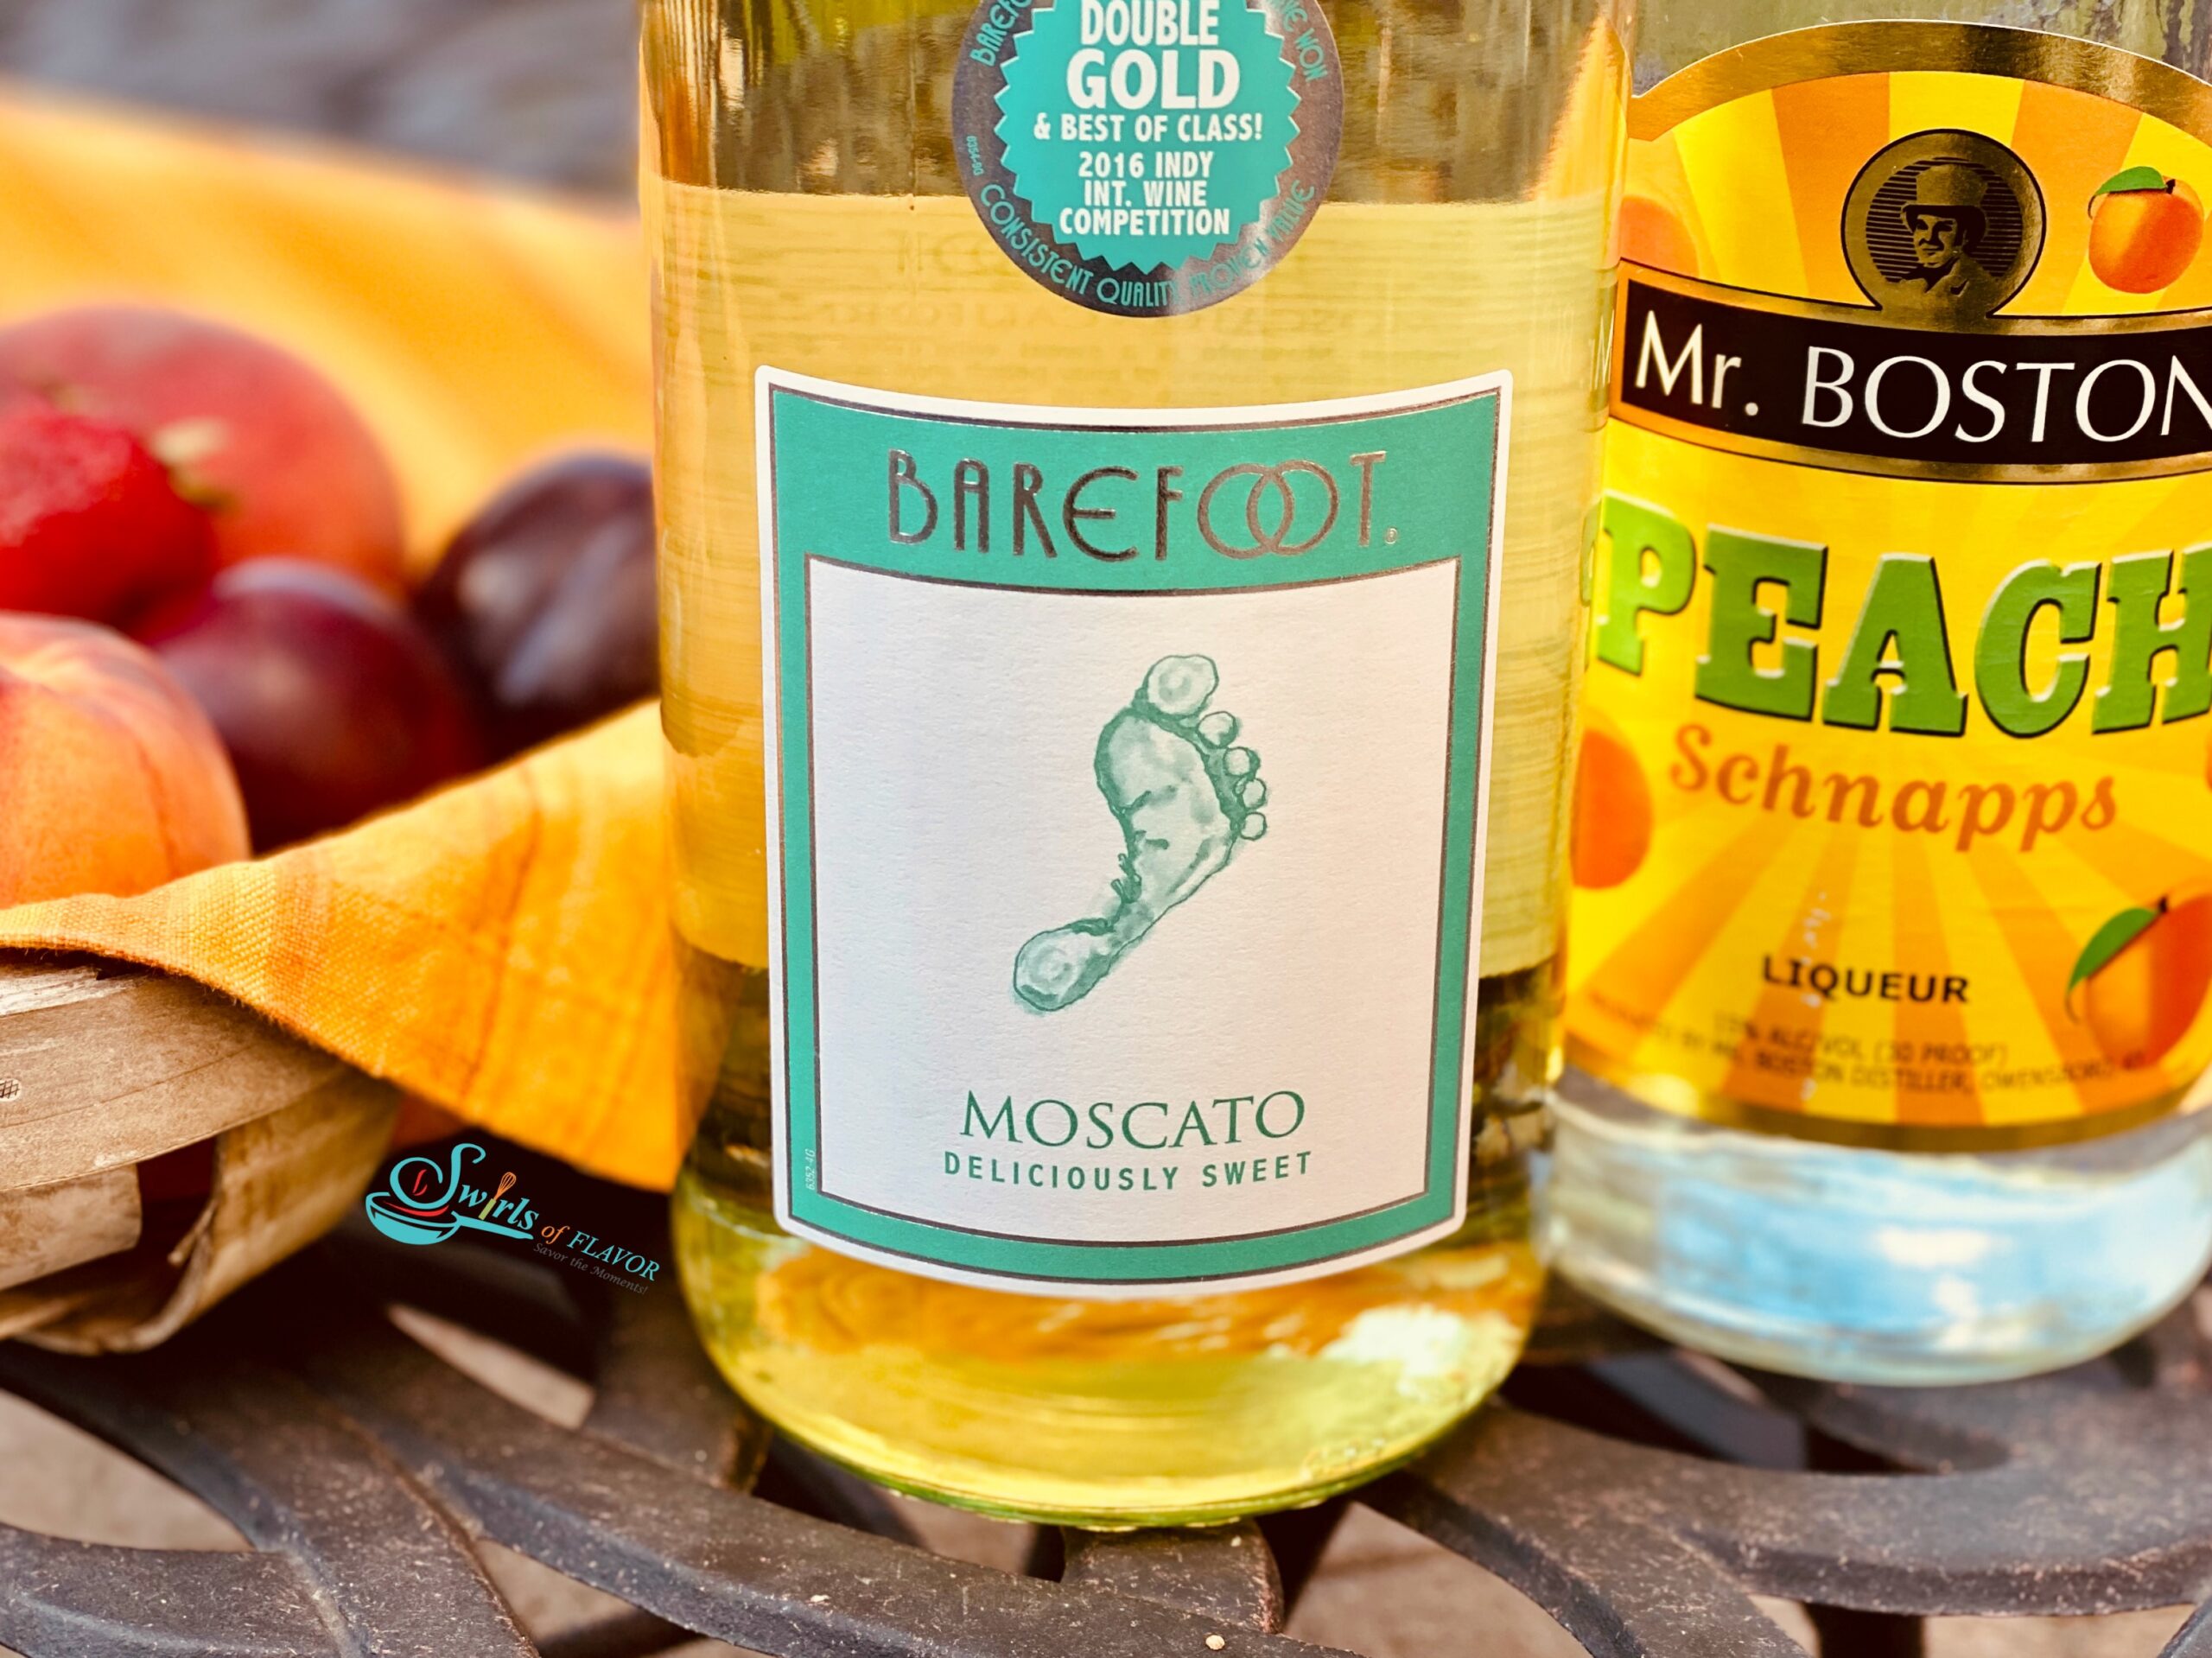 bottles of moscato wine and peach schnapps